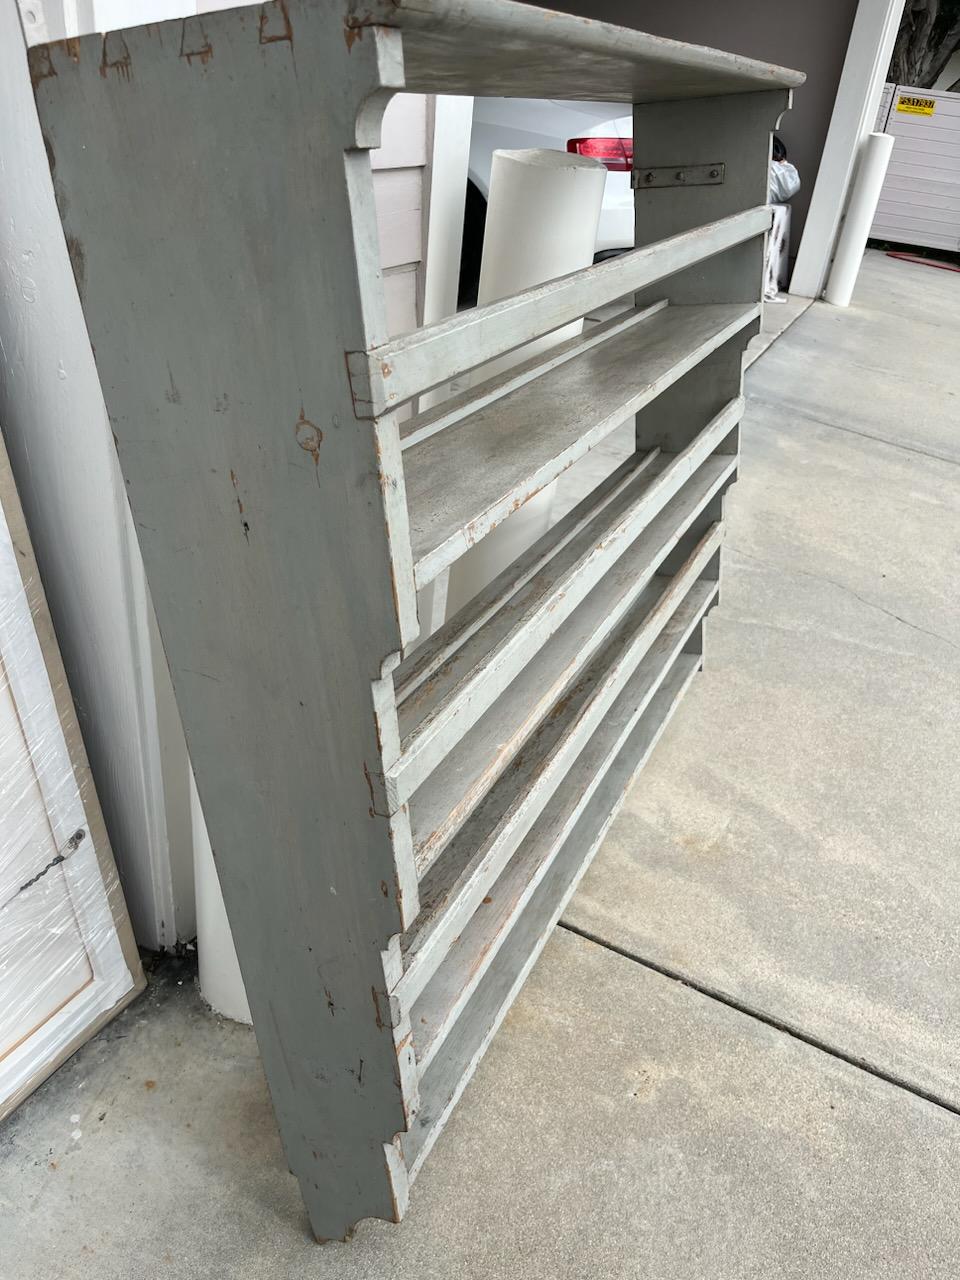 This amazing 19thc original grey painted hanging wall  plate rack with dovetailed case. This is in such fine condition and very hard to find the American plate rail.